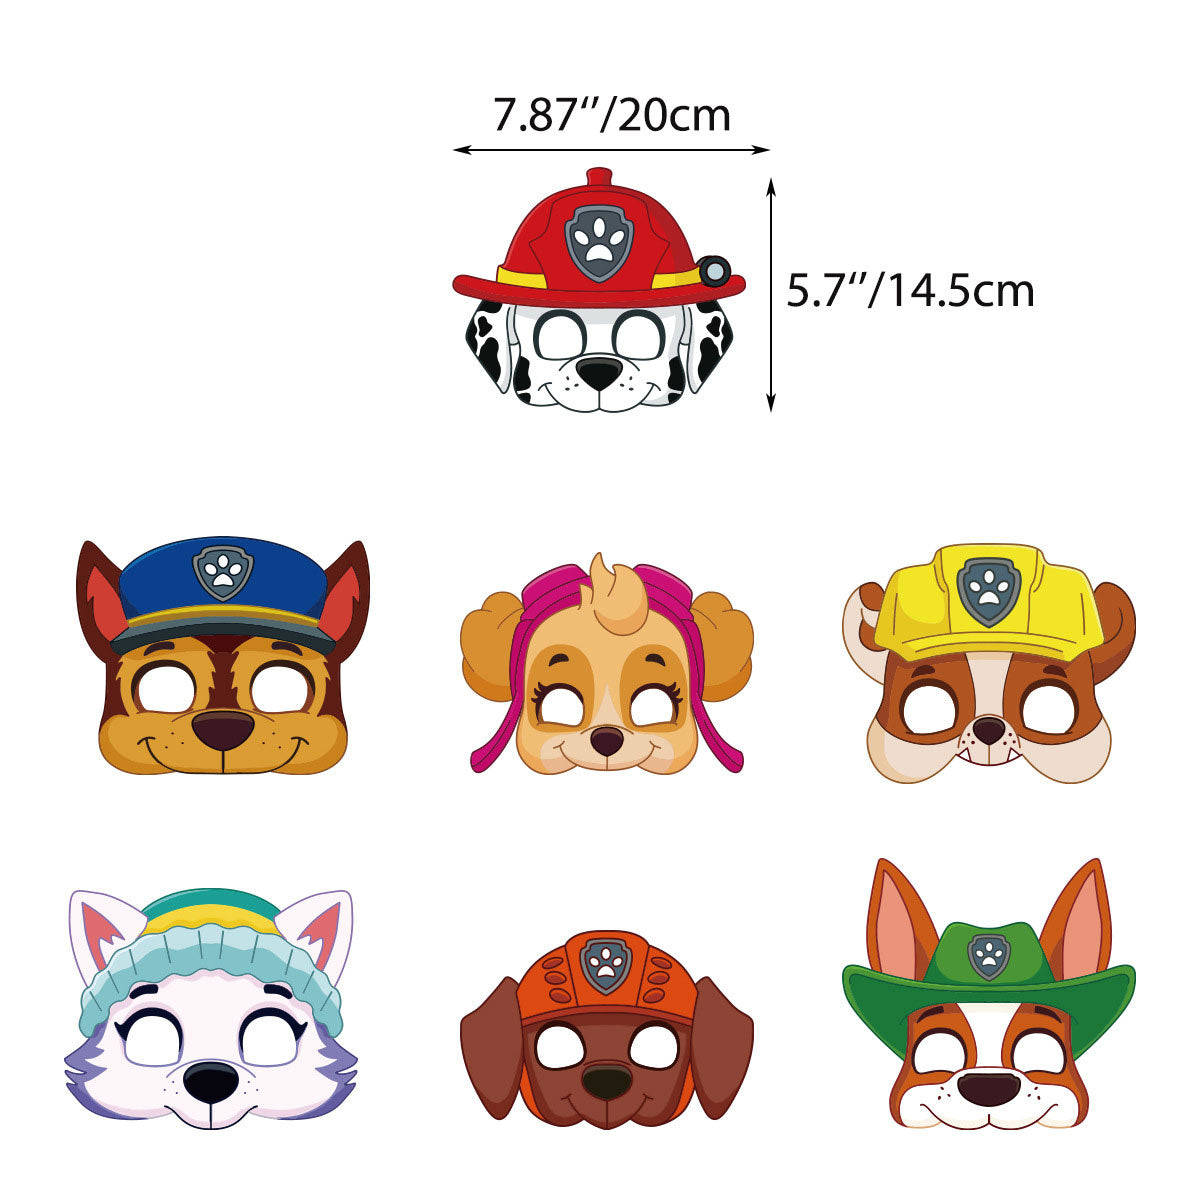 Paw Patrol Masks for the kids to pretend play as their favourite pups.